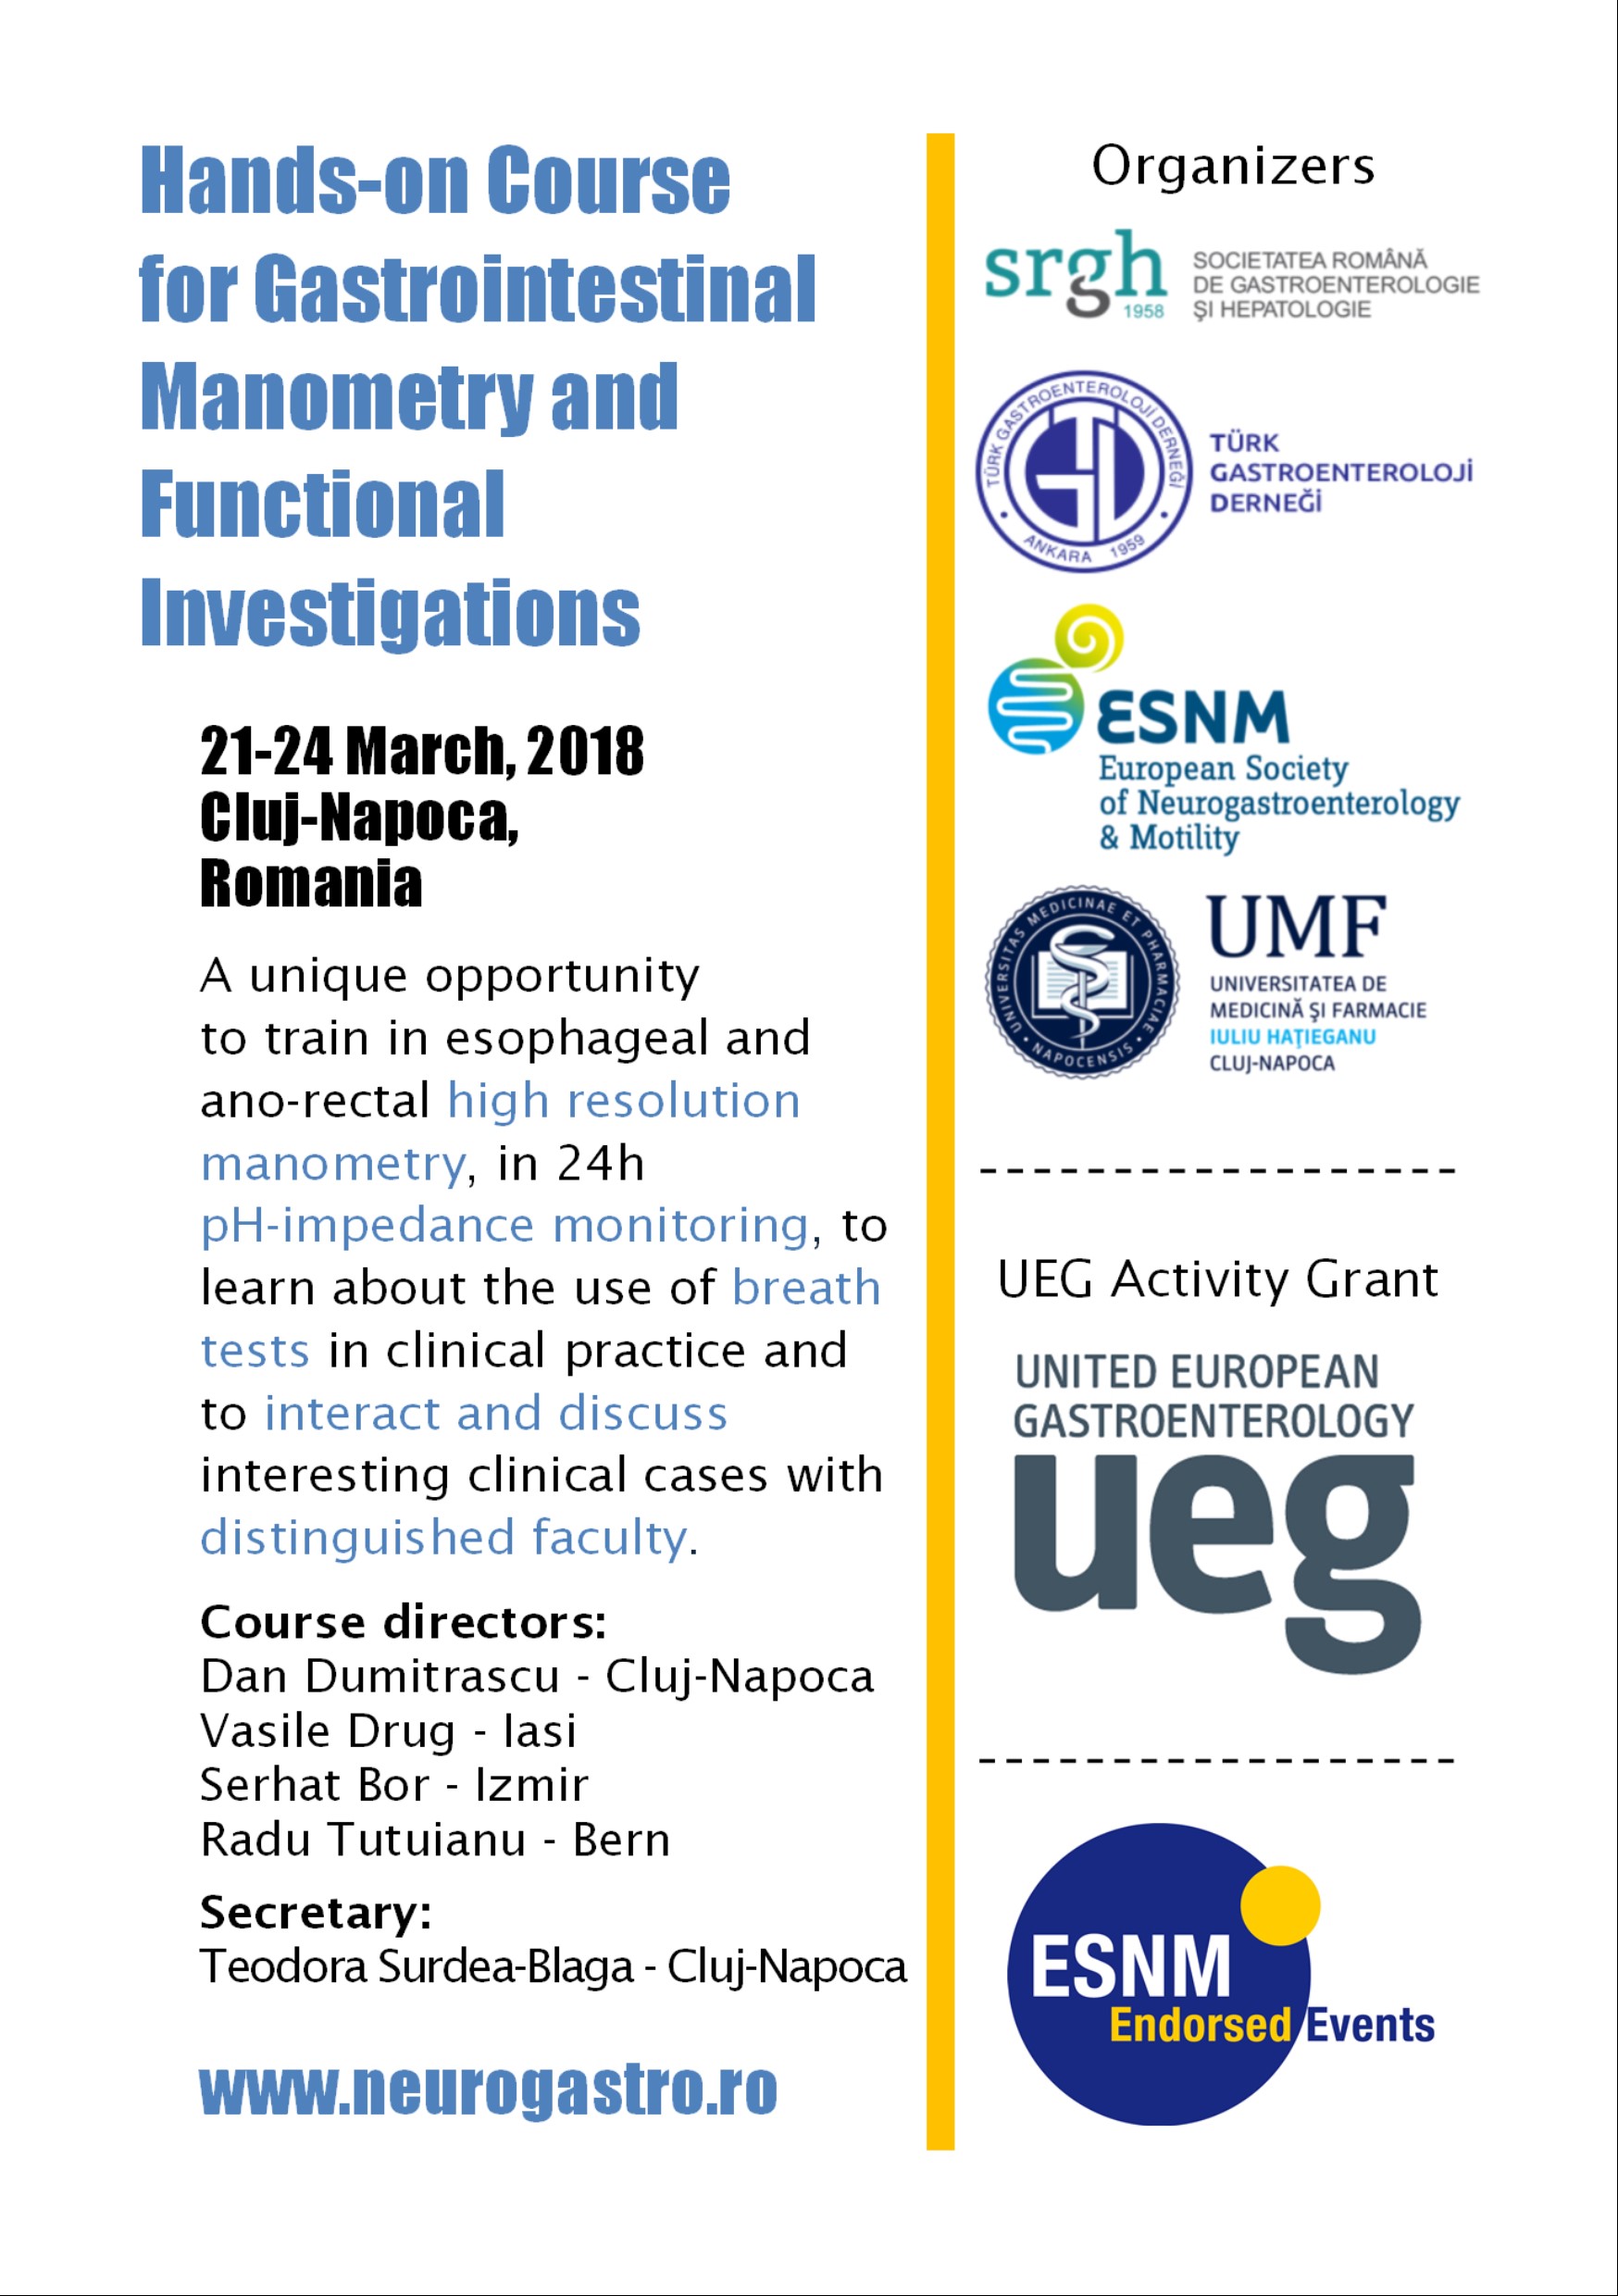 Hands-on Course for Gastrointestinal Manometry and Functional Investigations, 21-24 March 2018, Cluj-Napoca, Romania